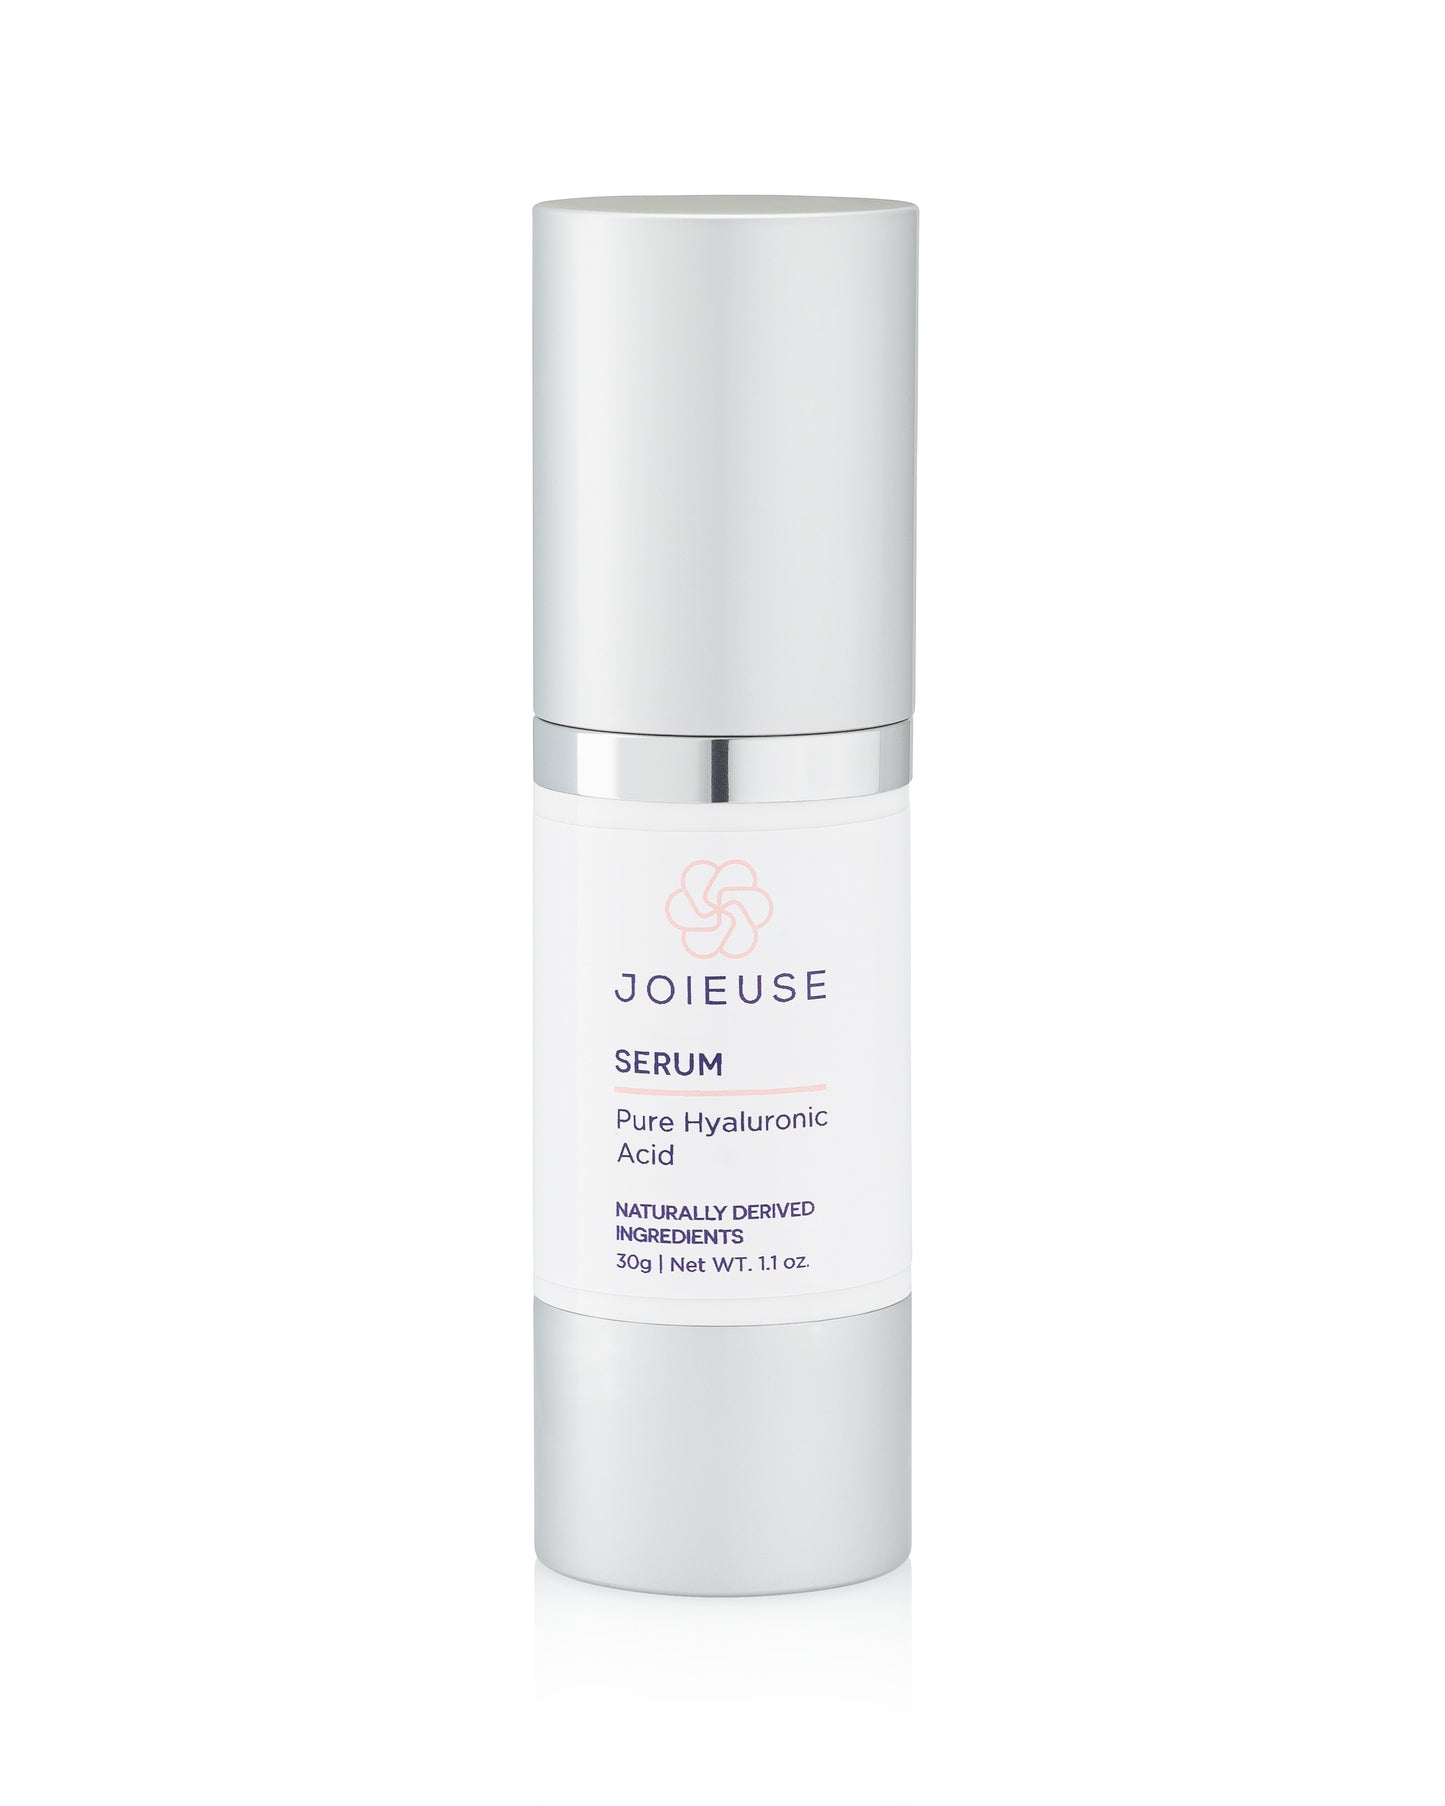 Joieuse Pure Hyaluronic Acid Serum for Sensitive Skin